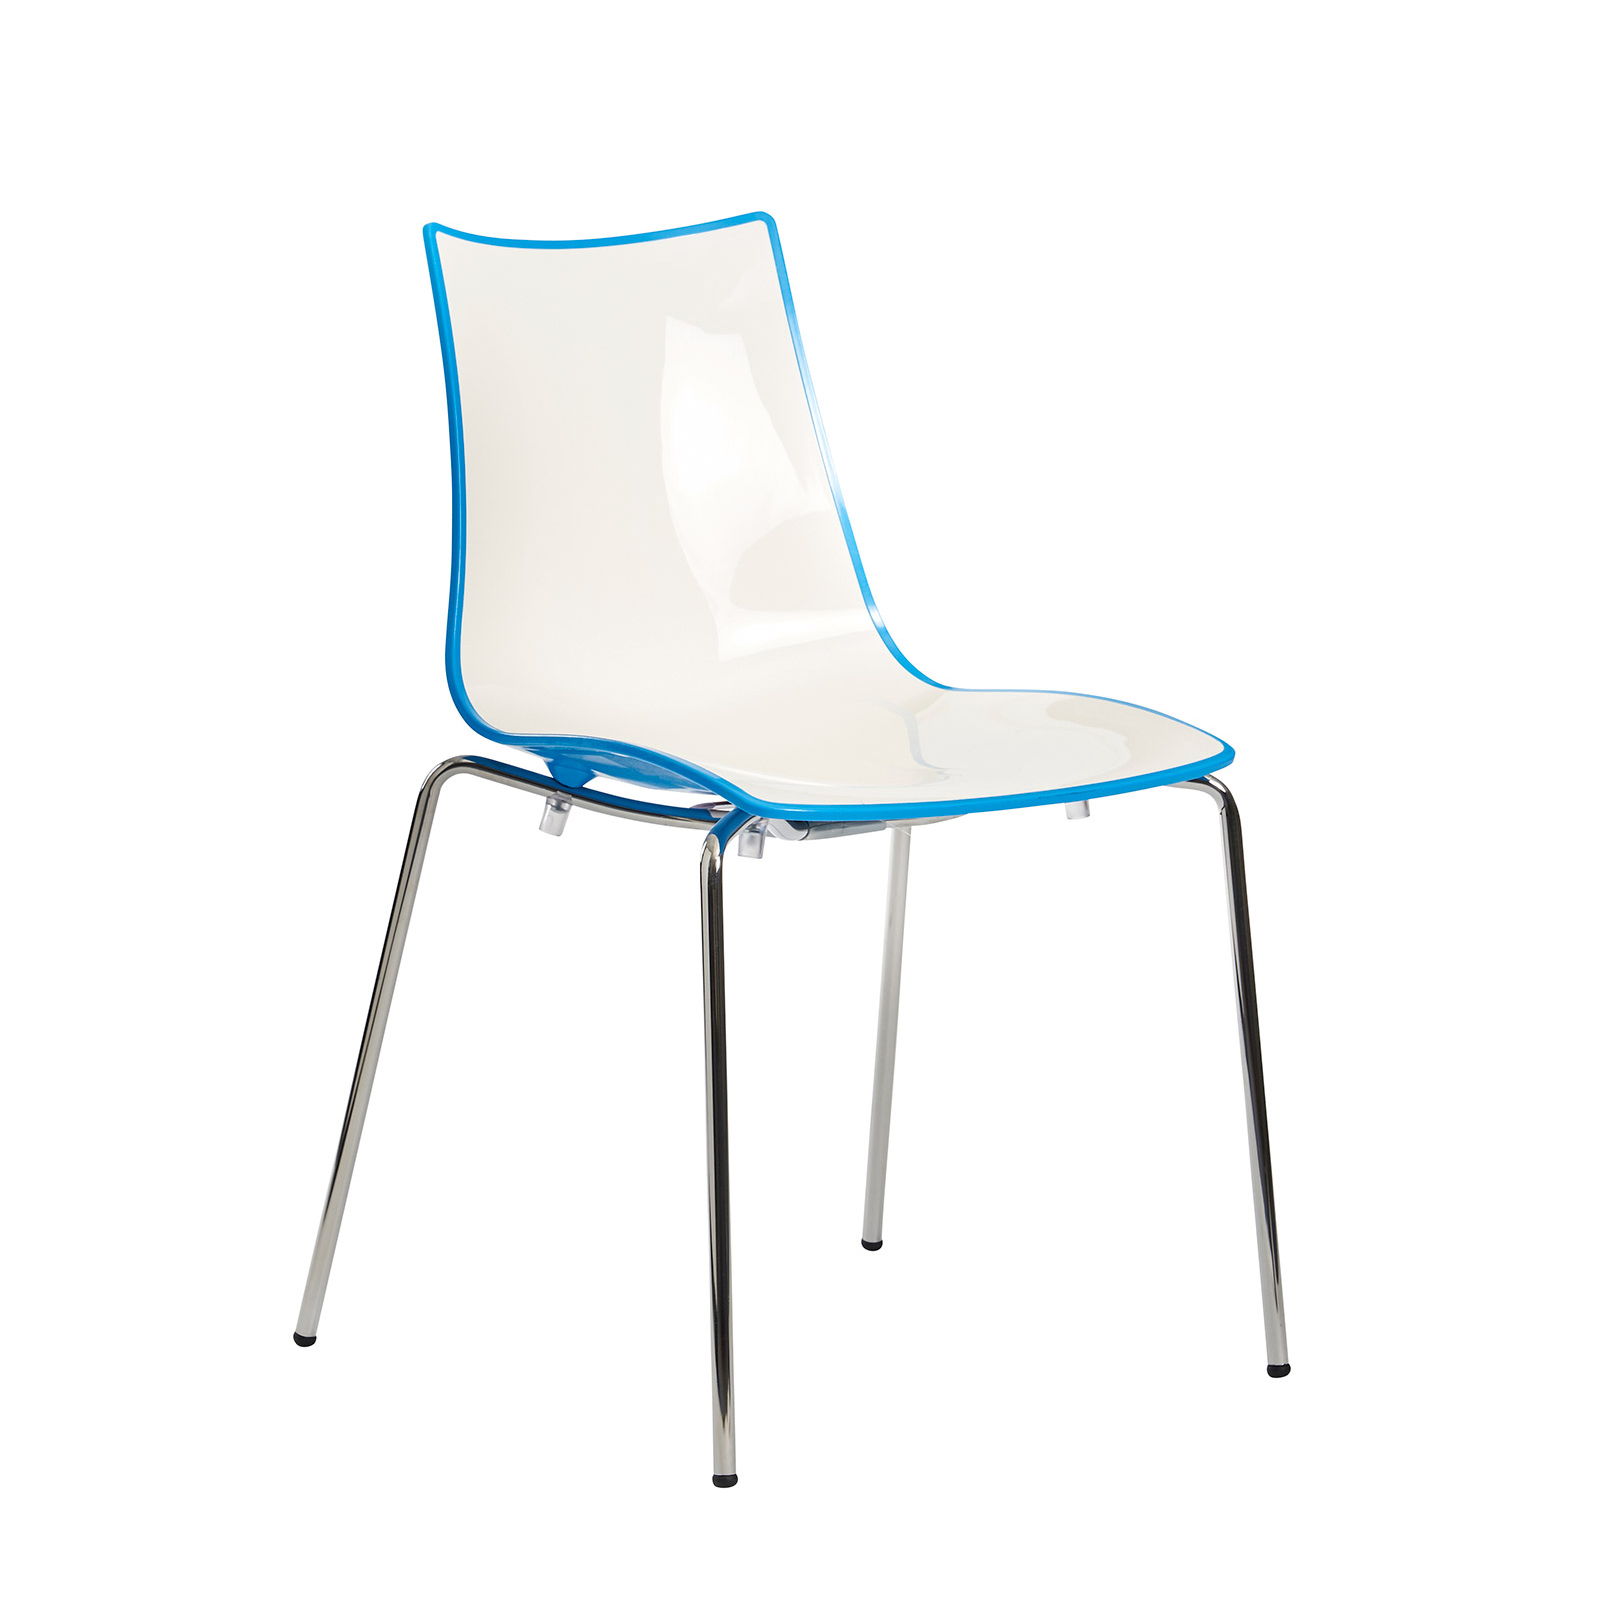 Gecko Cafe and Bistro Indoor Chair with Chrome Legs - Blue